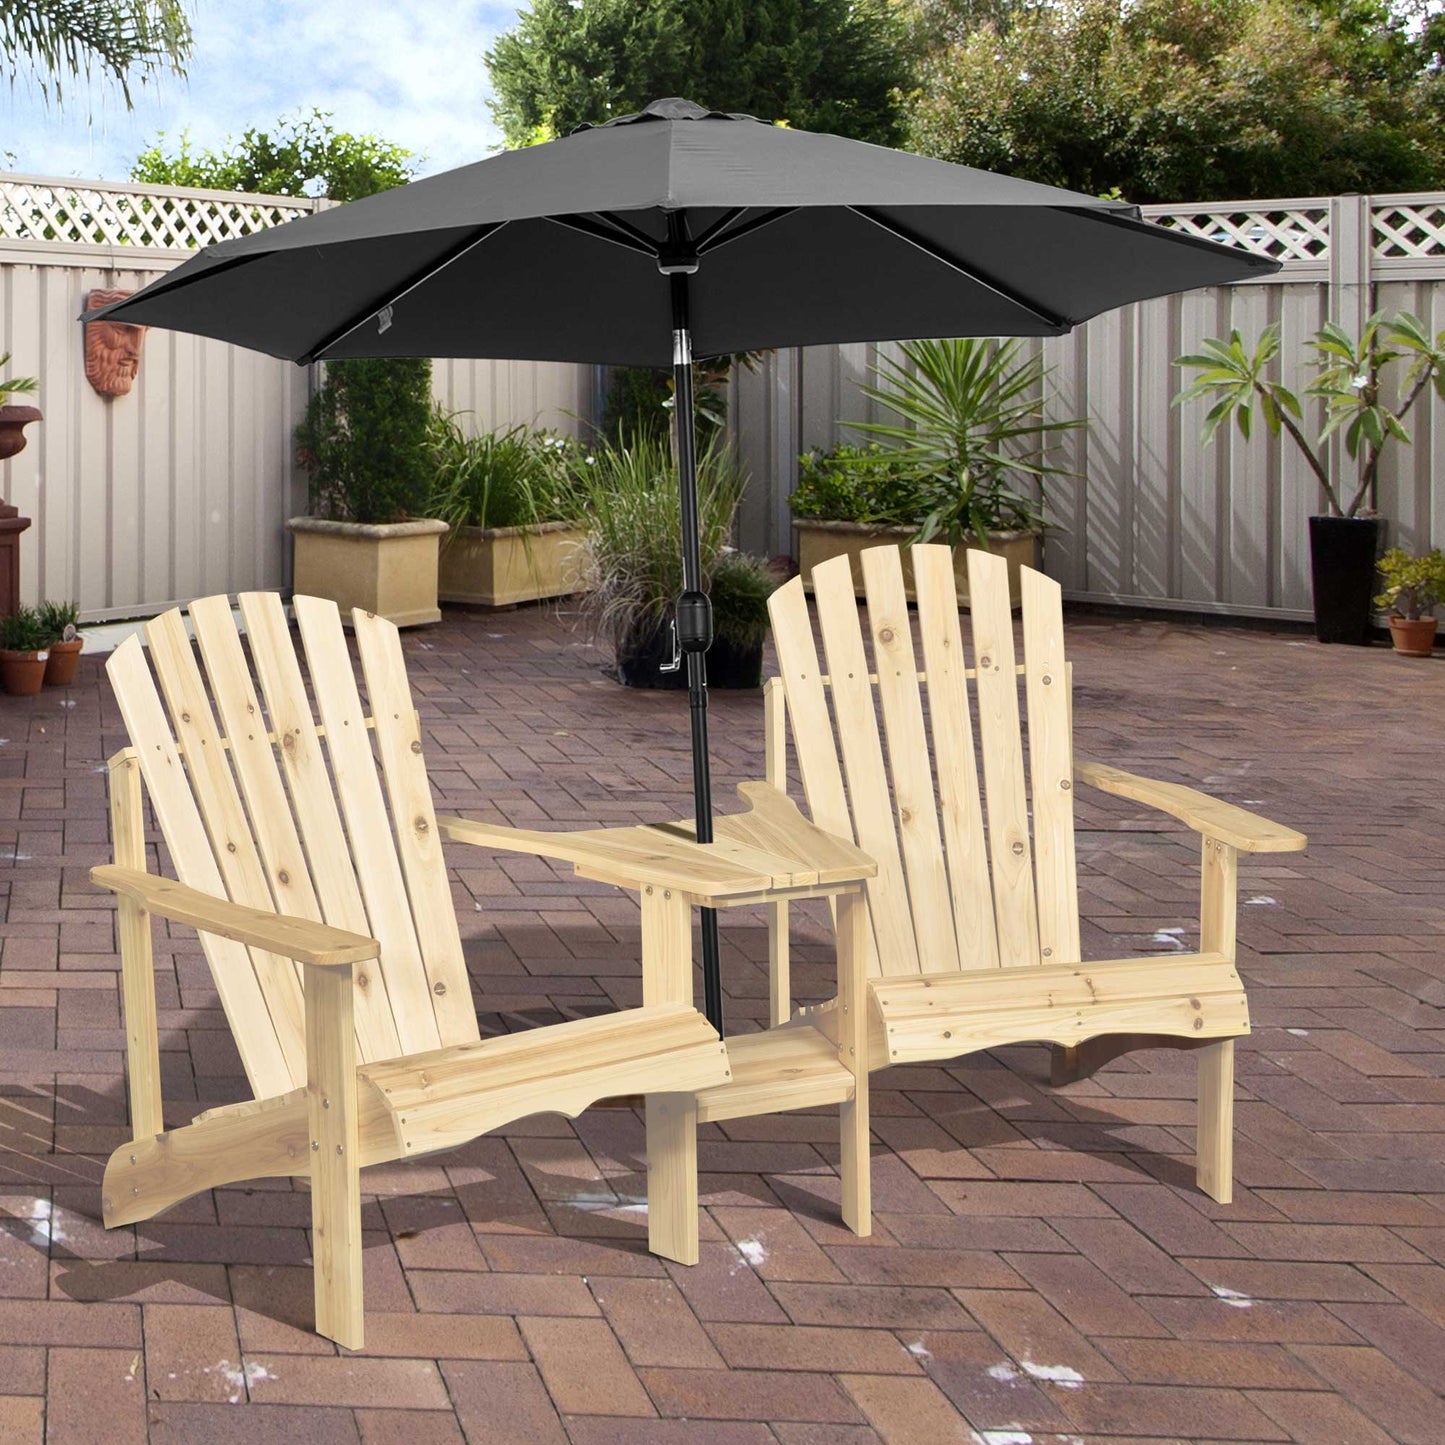 Outdoor and Garden-Set of 2 Wooden Adirondack Chairs, Outdoor Double Seat with Center Table and Umbrella Hole for Patio, Backyard, Deck, Fire Pit, Natural - Outdoor Style Company